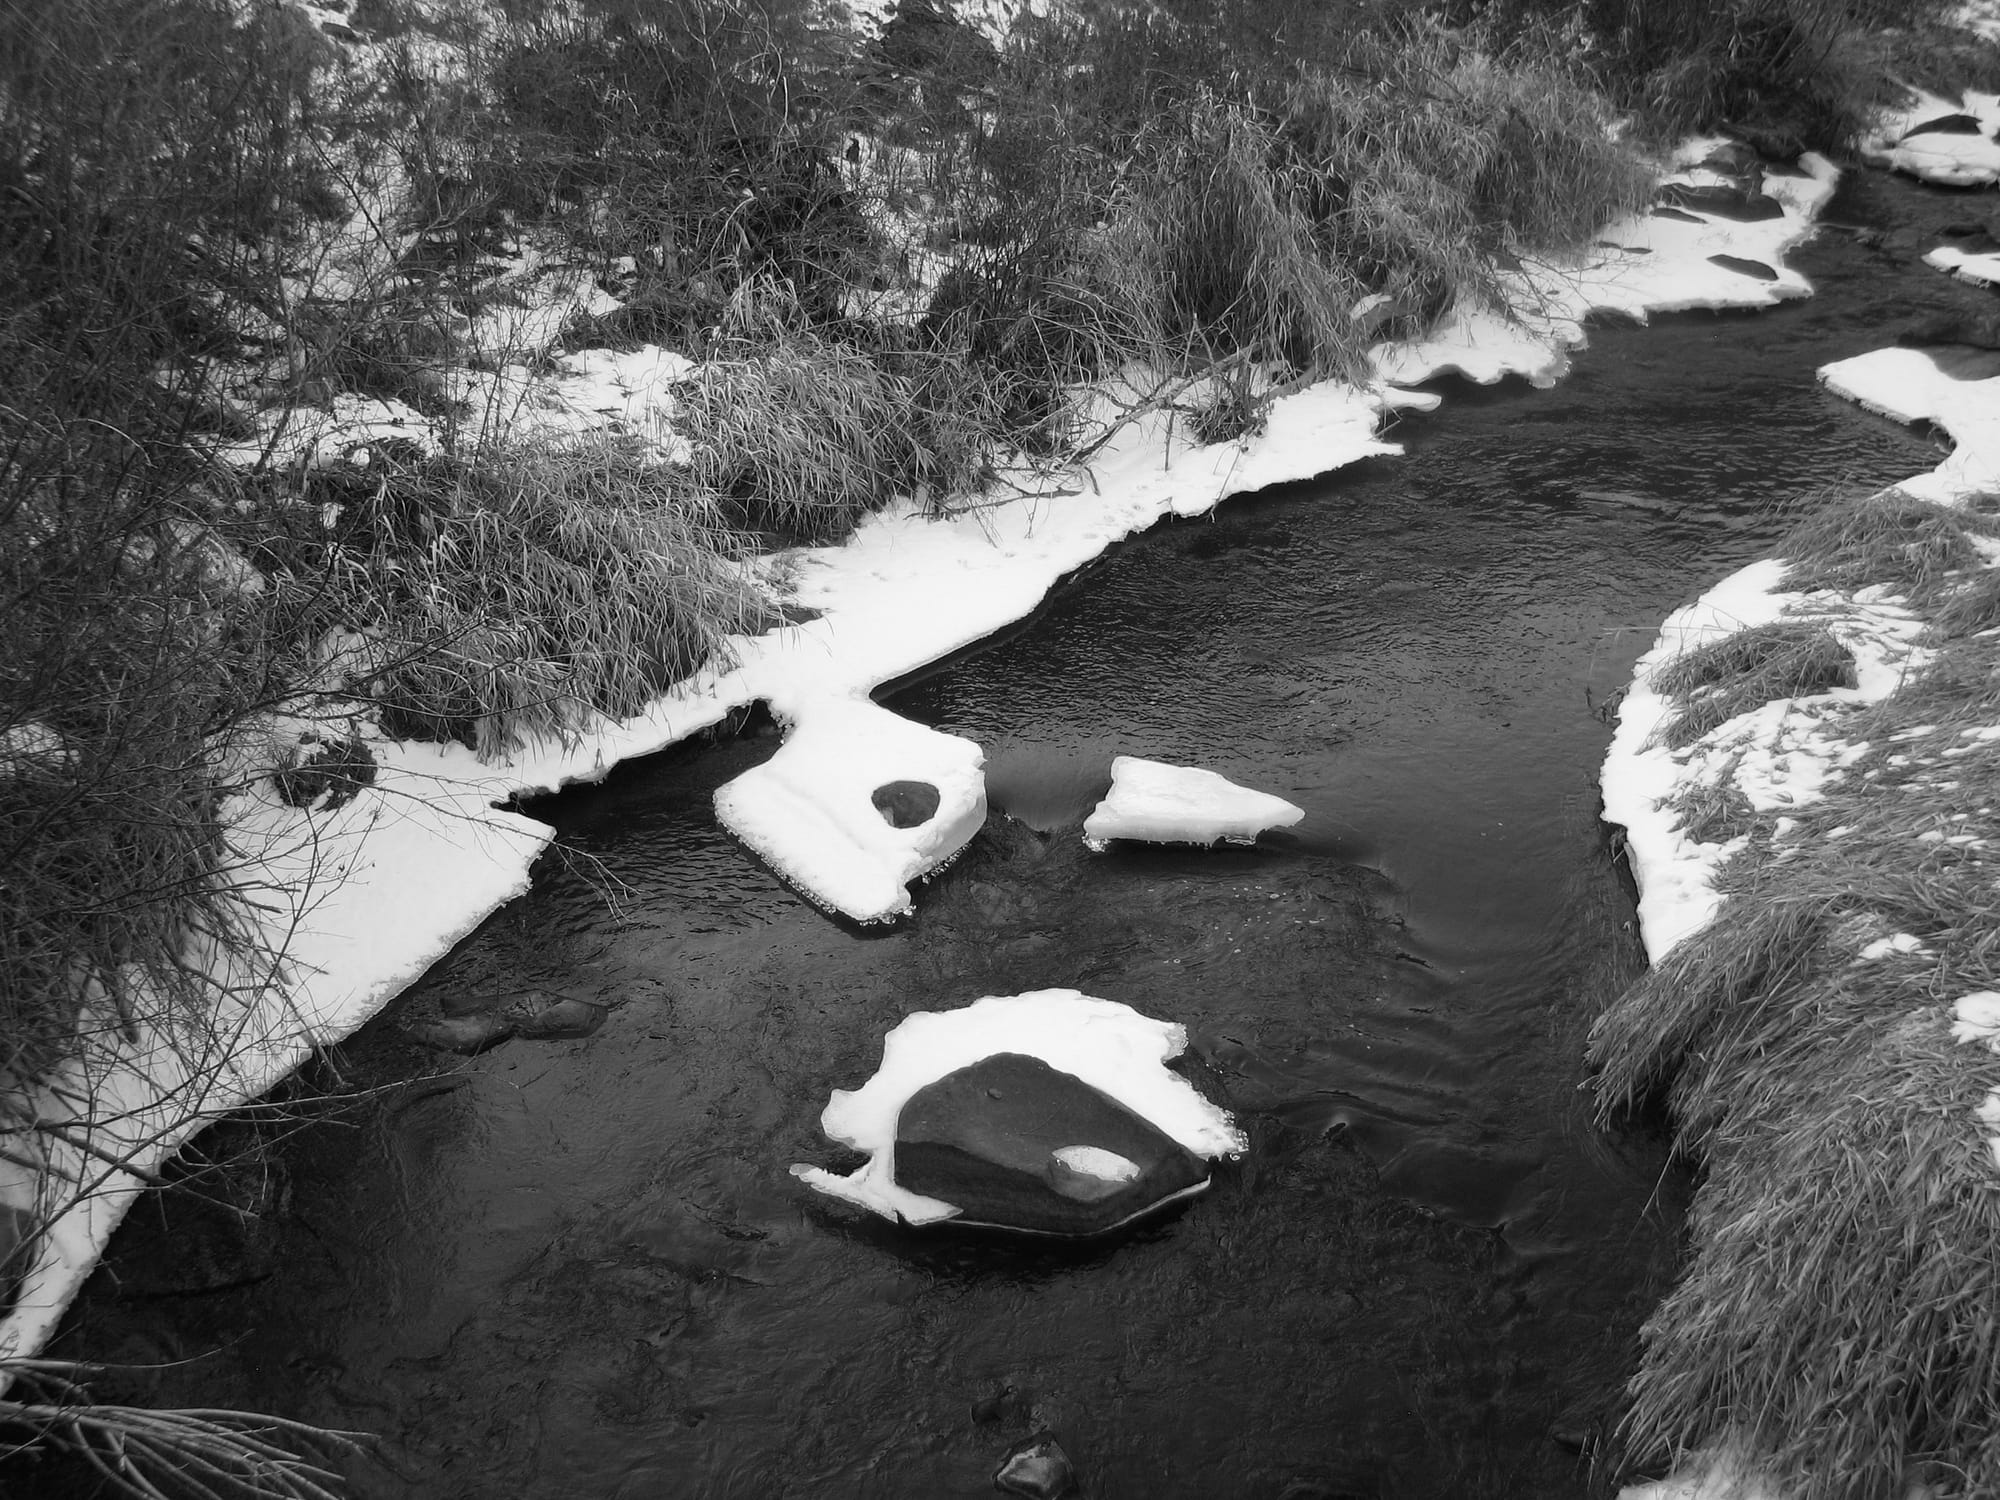 A black and white photo of a creek in winter, with snow on the banks and on rocks